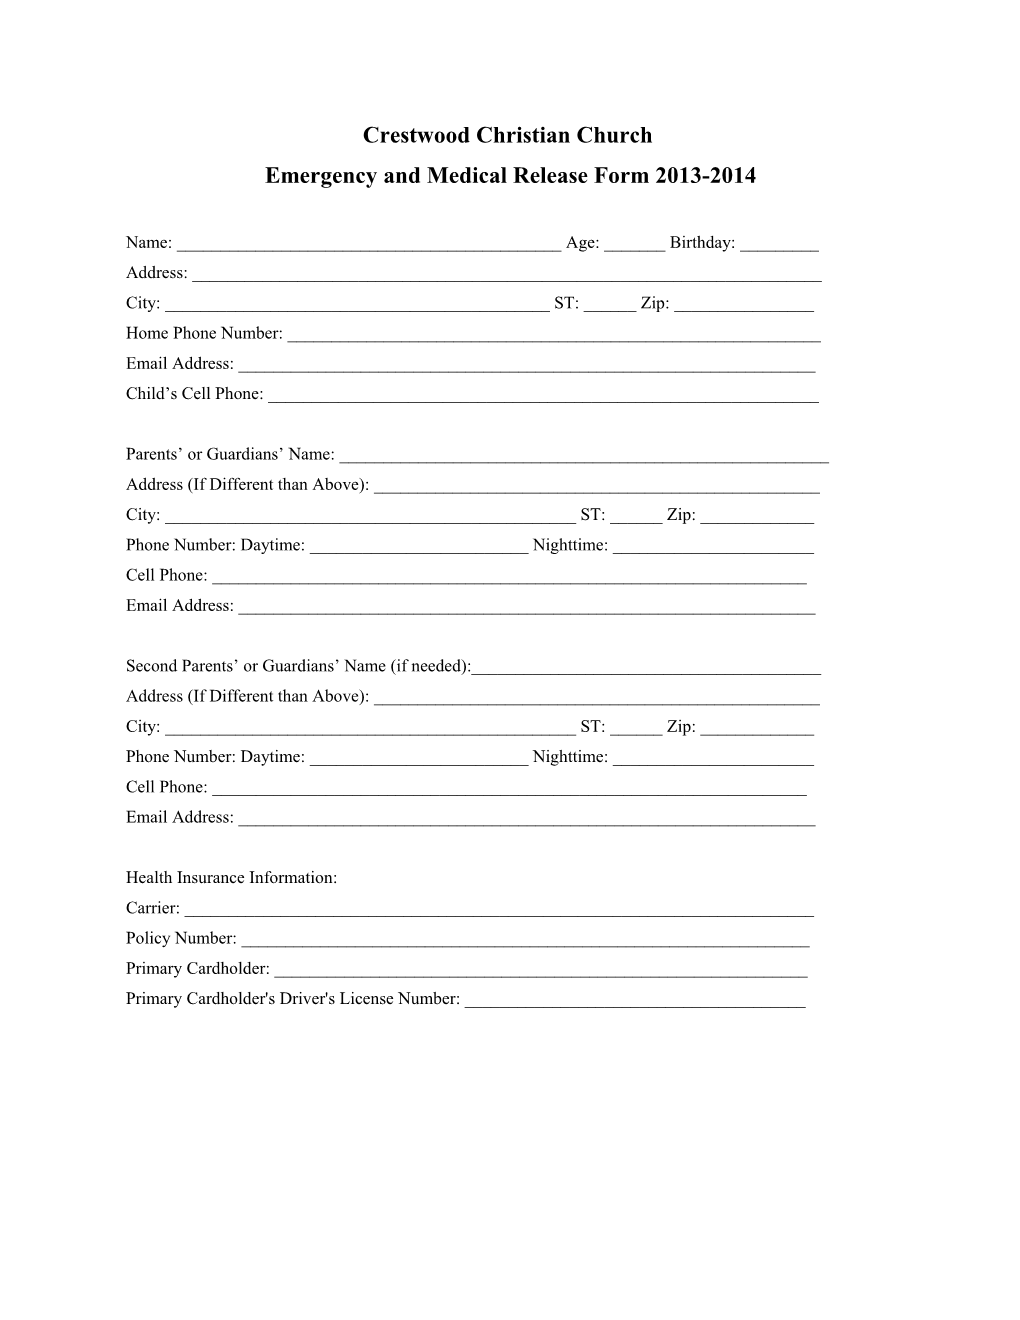 Crestwood Christian Church Emergency and Medical Release Form 2013-2014